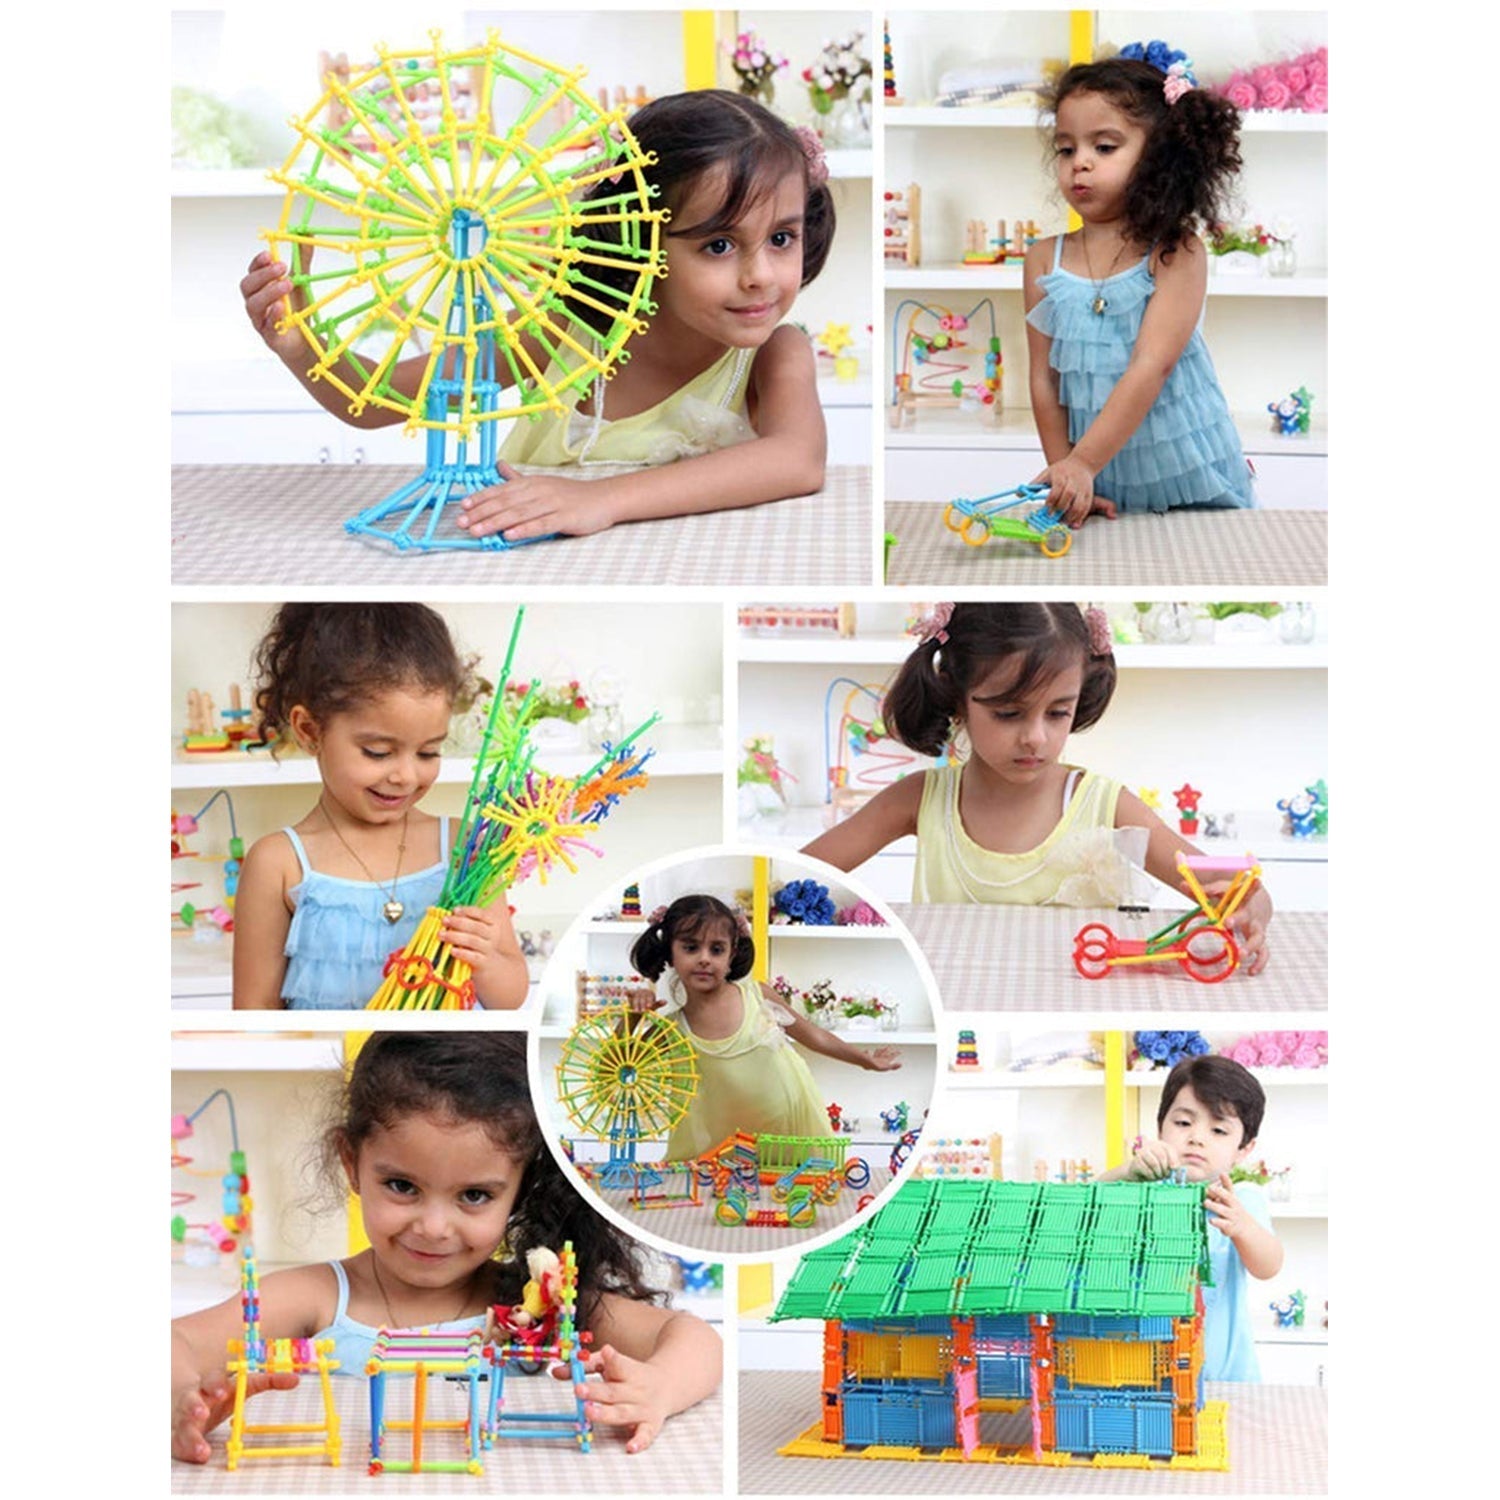 3905 400 Pc Sticks Blocks Toy used in all kinds of household and official places by kids and children's specially for playing and enjoying purposes.